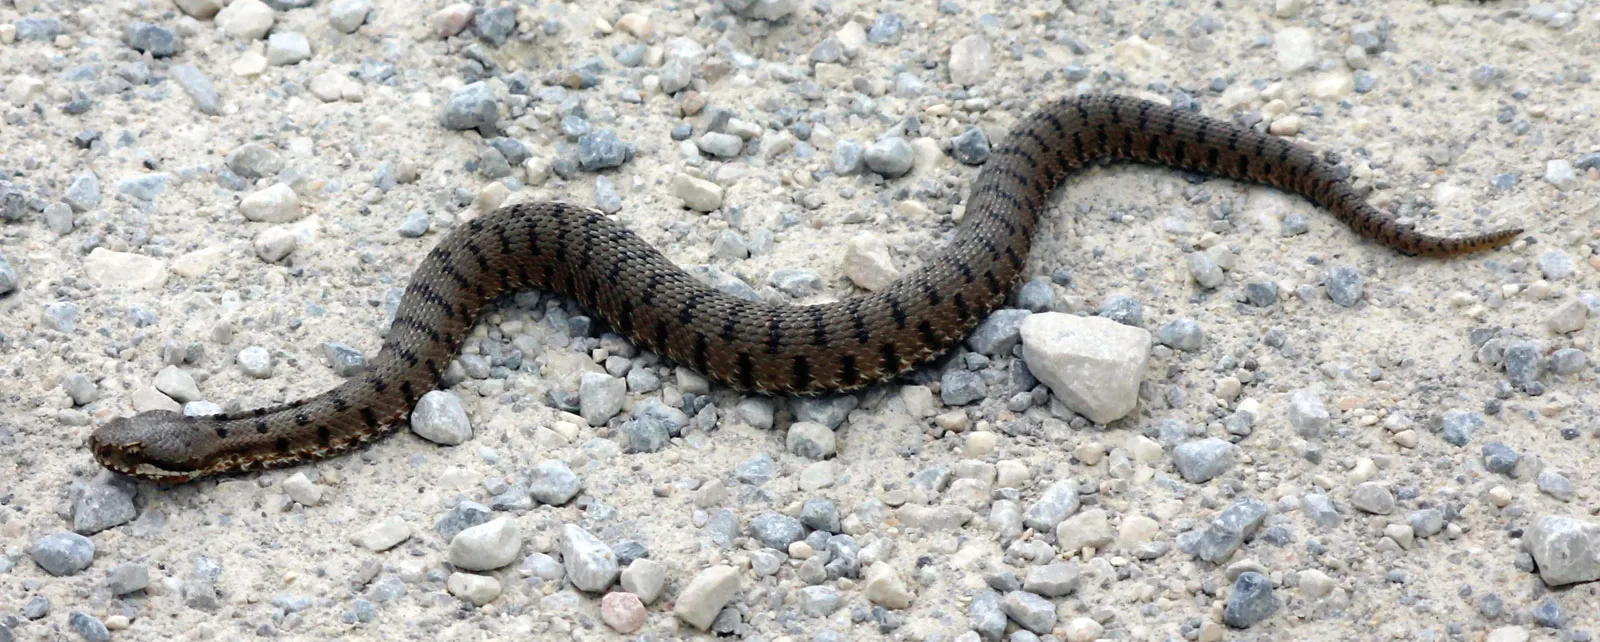 Brown snake with a pattern of alternating black markings resembling a zigzag, on a field of rocks